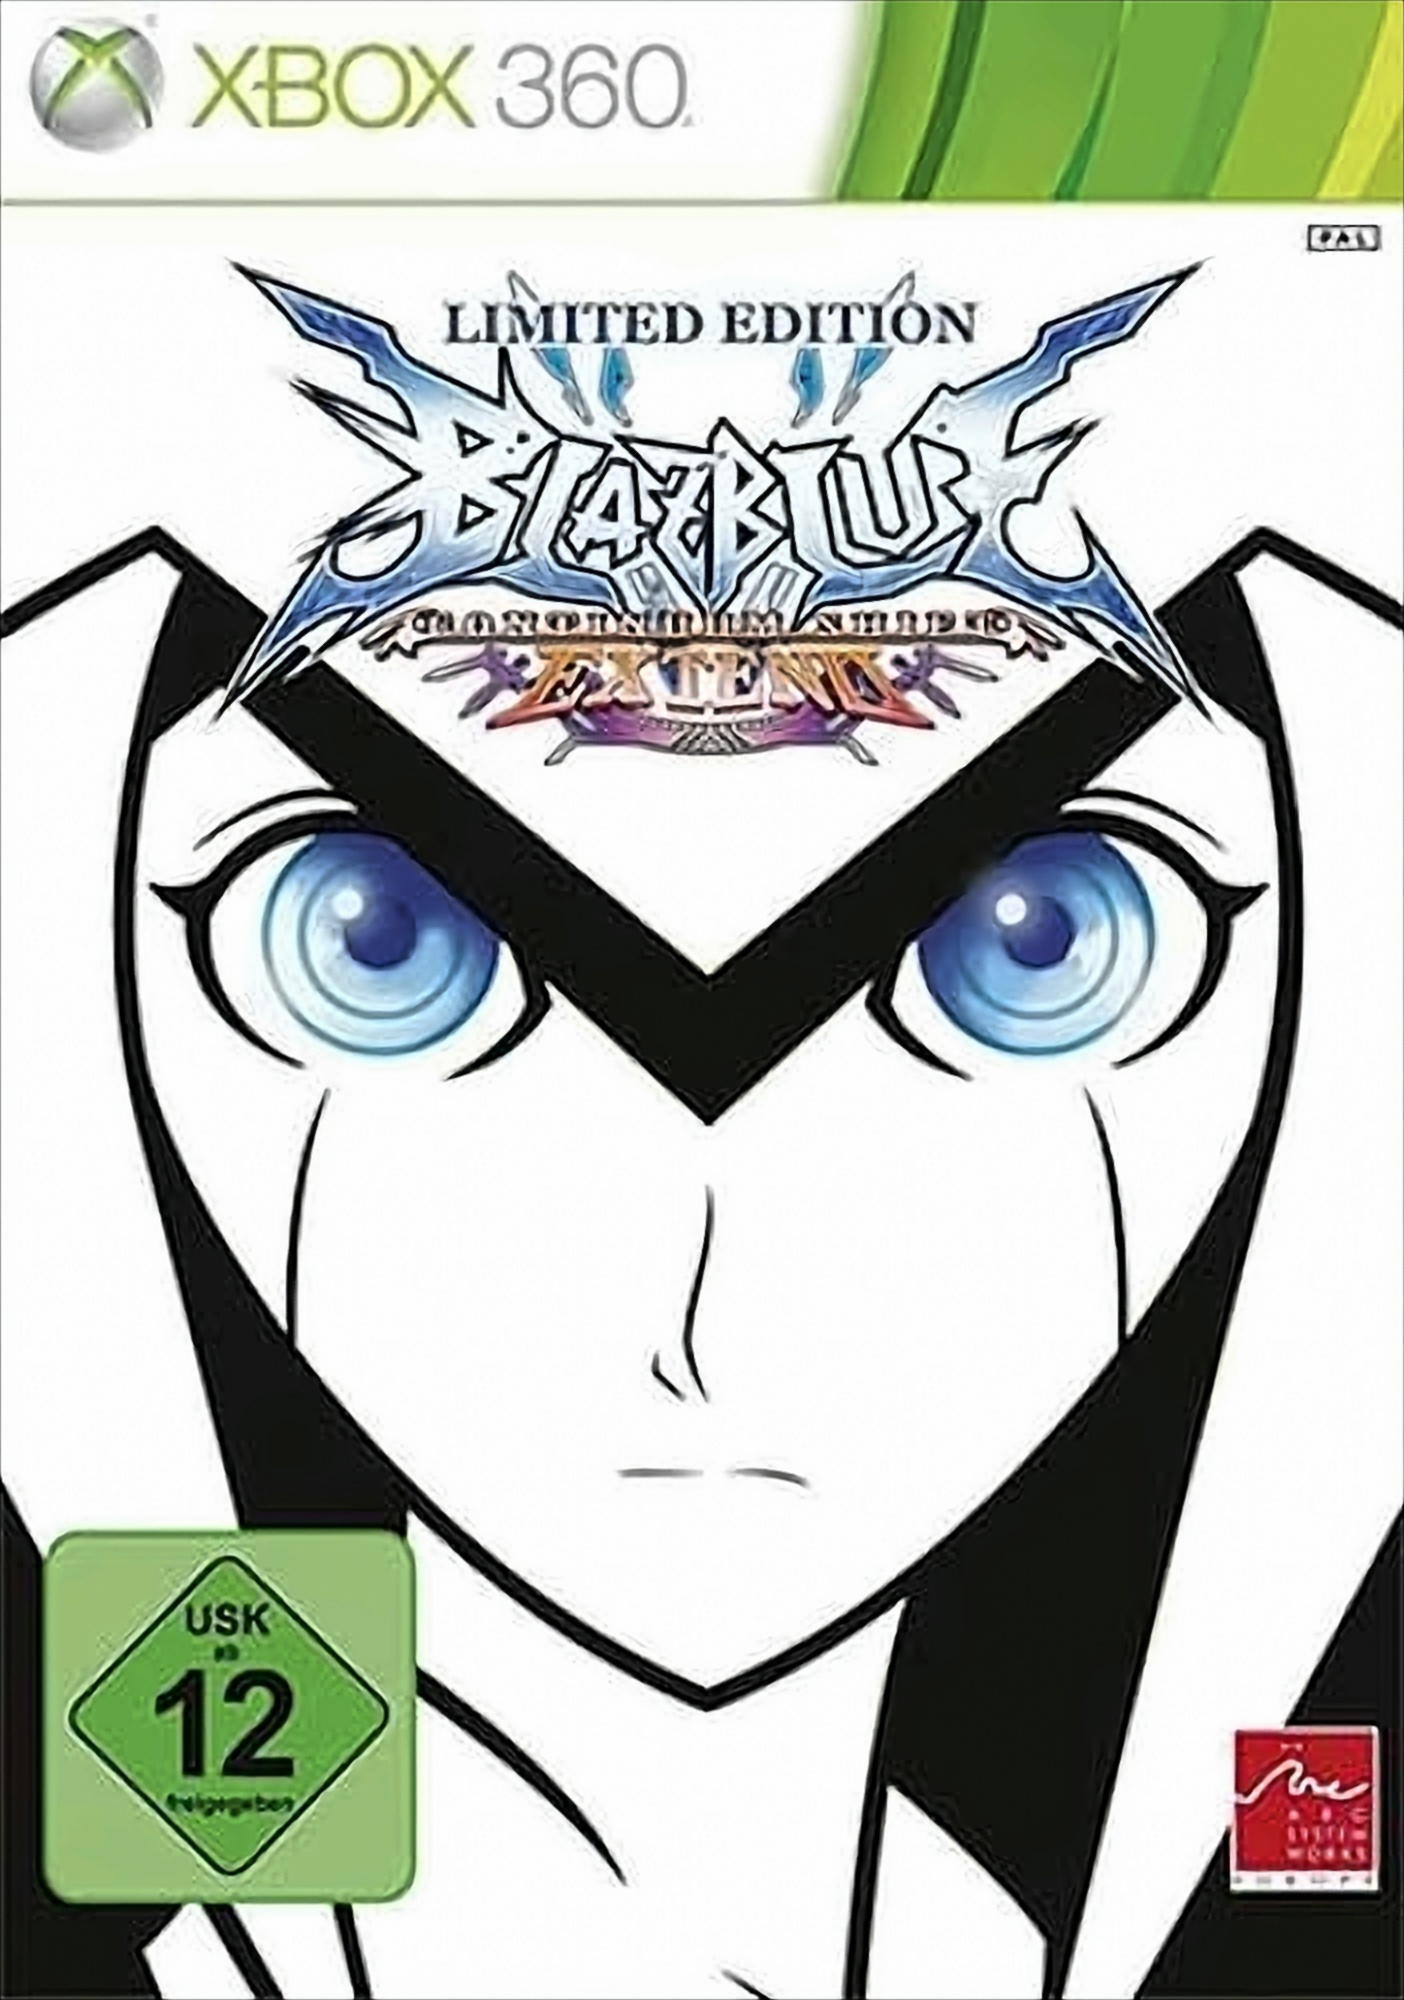 BlazBlue: Continuum Shift Extend - Limited 360] - [Xbox Edition